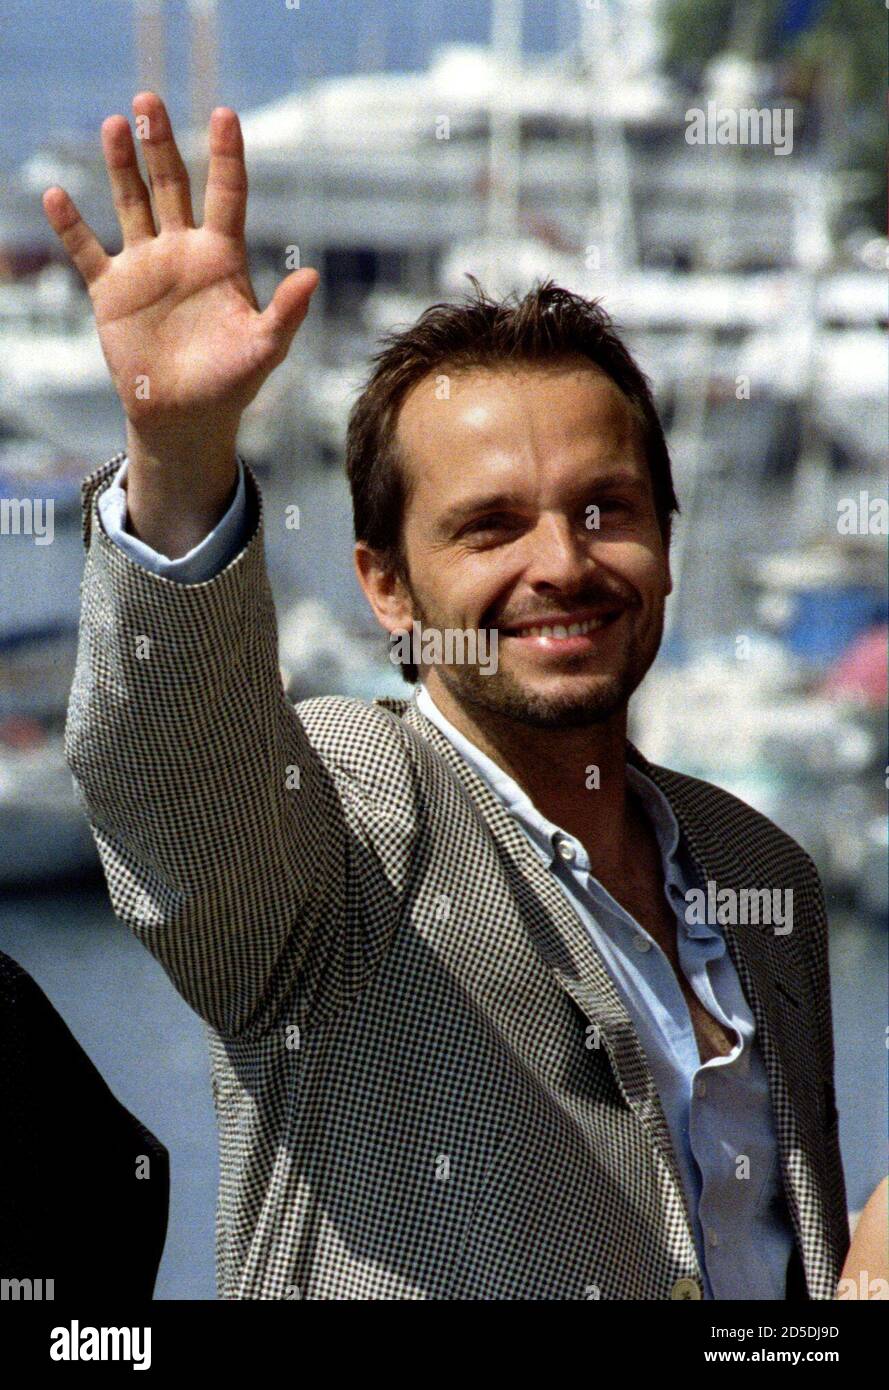 Miguel Bose of Spain waves during a photo call for French director  Bartabas' "Mazeppa" in competition at the 46th Cannes Film Festival, May  23. Actor Bose, also a singer with an international